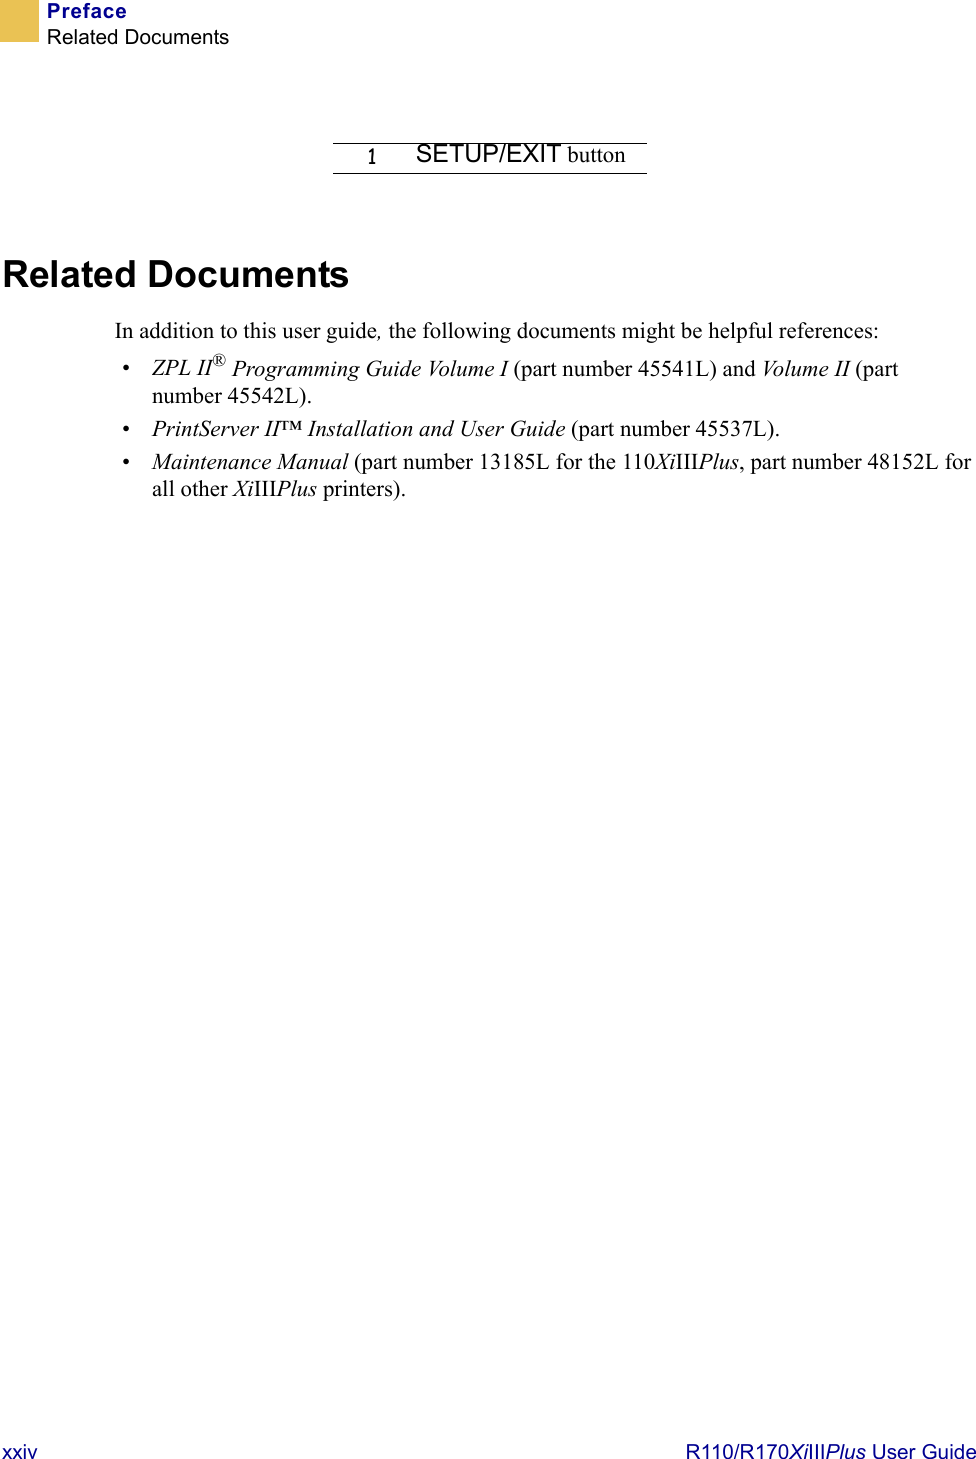 xxiv  R110/R170XiIIIPlus User GuidePrefaceRelated DocumentsRelated DocumentsIn addition to this user guide, the following documents might be helpful references:•ZPL II® Programming Guide Volume I (part number 45541L) and Vo lum e  II  (part number 45542L).•PrintServer II™ Installation and User Guide (part number 45537L). •Maintenance Manual (part number 13185L for the 110XiIIIPlus, part number 48152L for all other XiIIIPlus printers).1SETUP/EXIT button